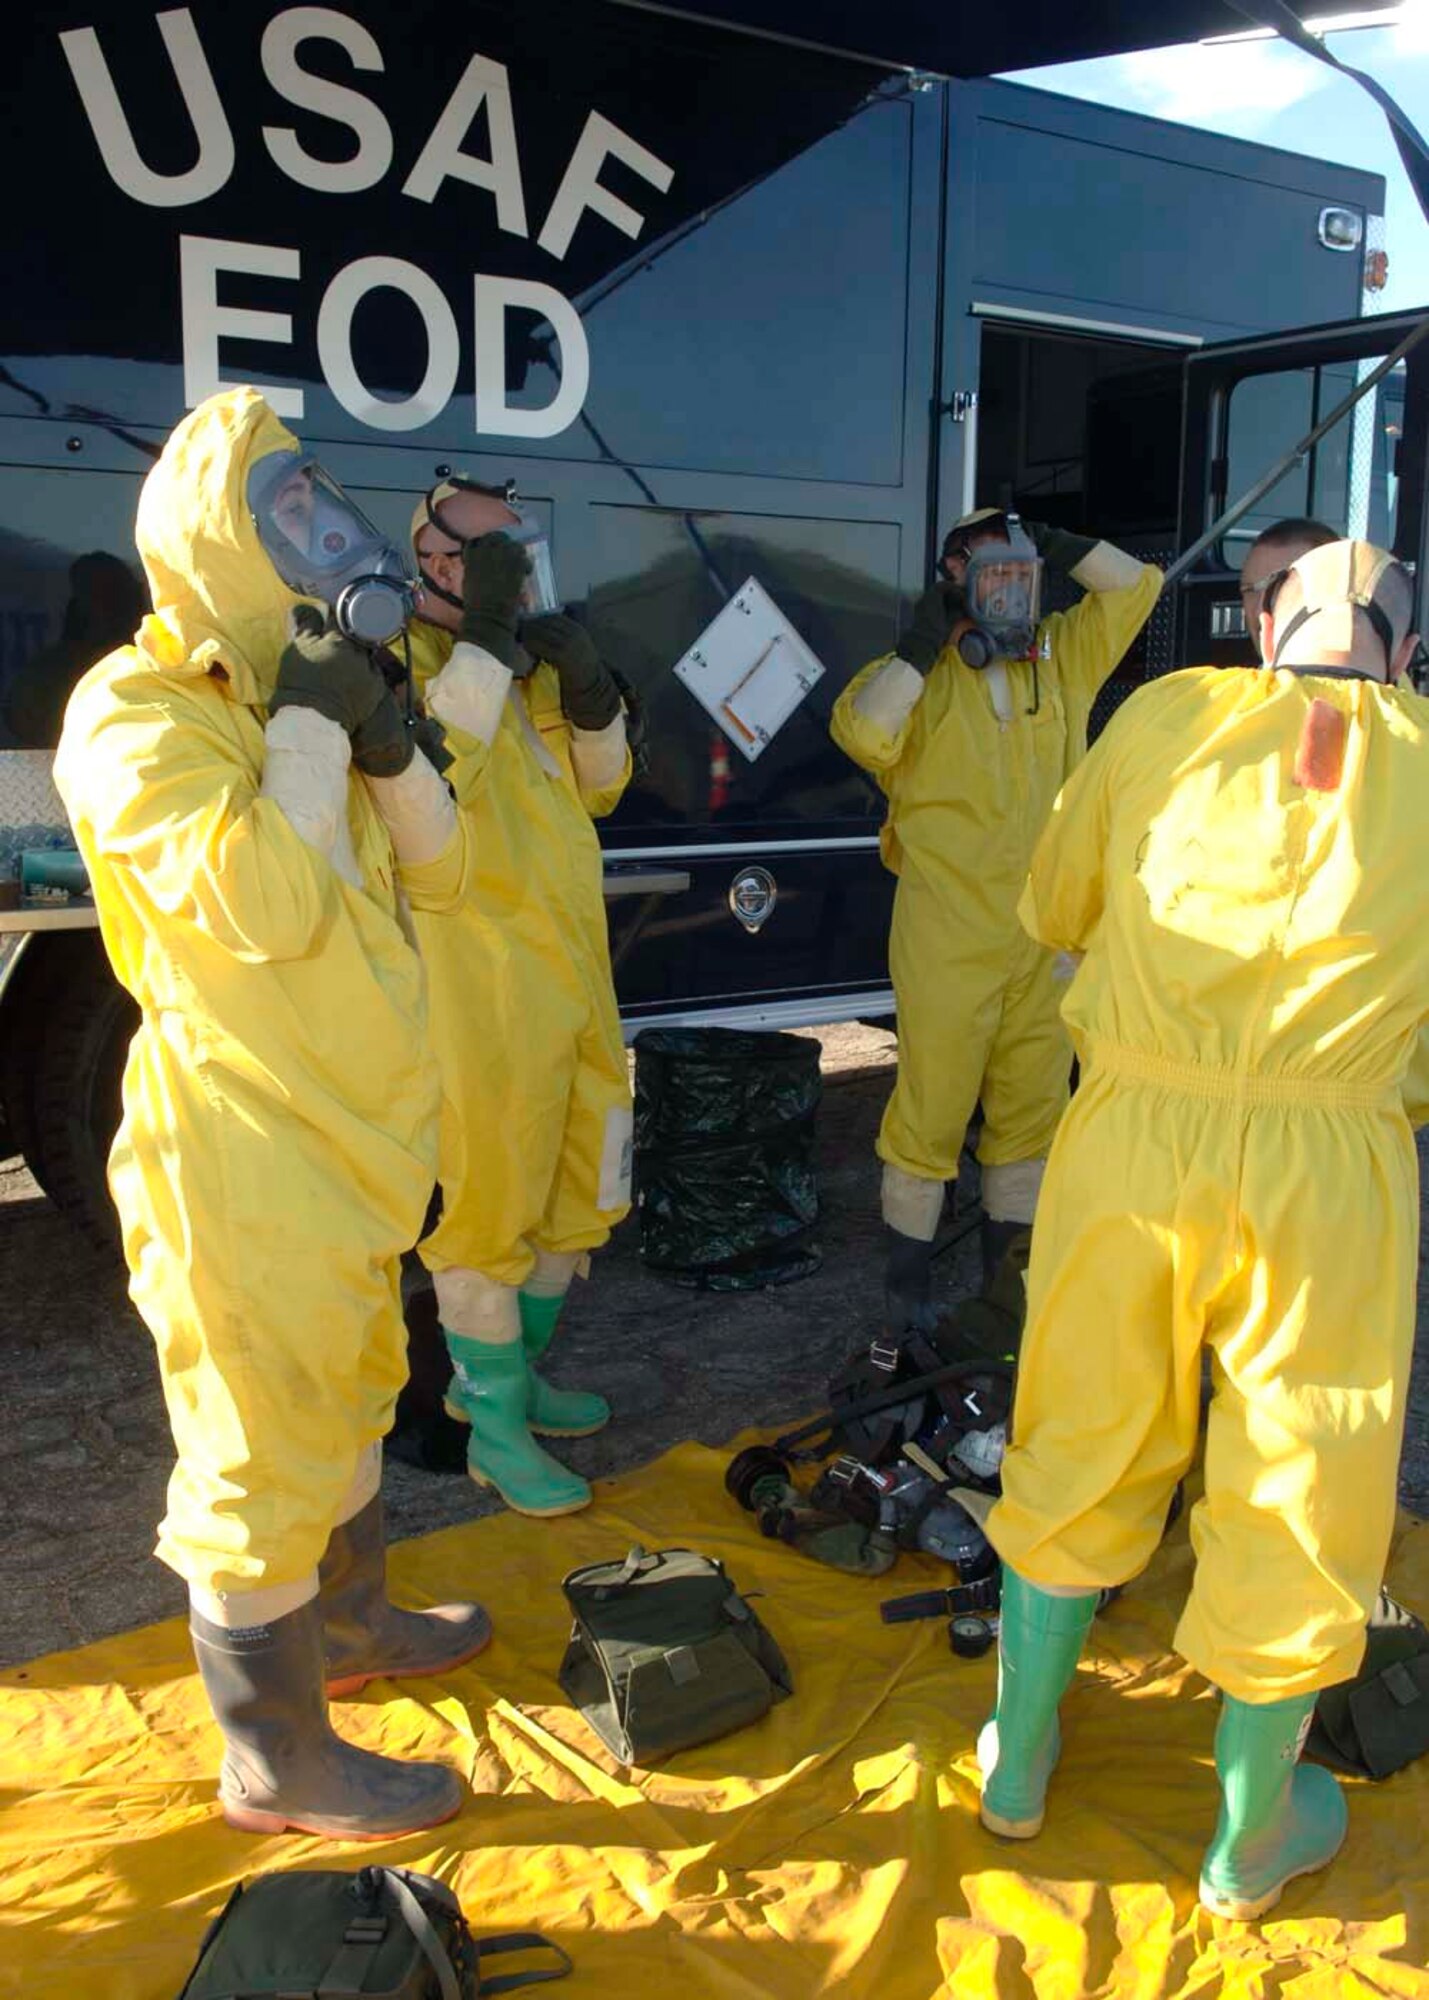 Airman from the explosive ordnance disposal team prepare their masks and radiological suits prior to the initial setup entry procedures before going to search the wreakage of a simulated aircraft accident Dec. 4 at Davis-Monthan AFB, Ariz. Exercise Vigilant Shield 07 is a joint Department of Defense and federal nuclear weapon accident exercise. The exercise scenario involved a C-17 Globemaster III carrying four nuclear weapons to be diverted to Davis-Monthan AFB due to simulated engine failure that caused an aircraft accident. Sergeant Swann is an explosive ordnance disposal journeyman from the 355th Civil Engineering Squadron. (U.S. Air Force photo/Senior Airman Christina D. Ponte)
